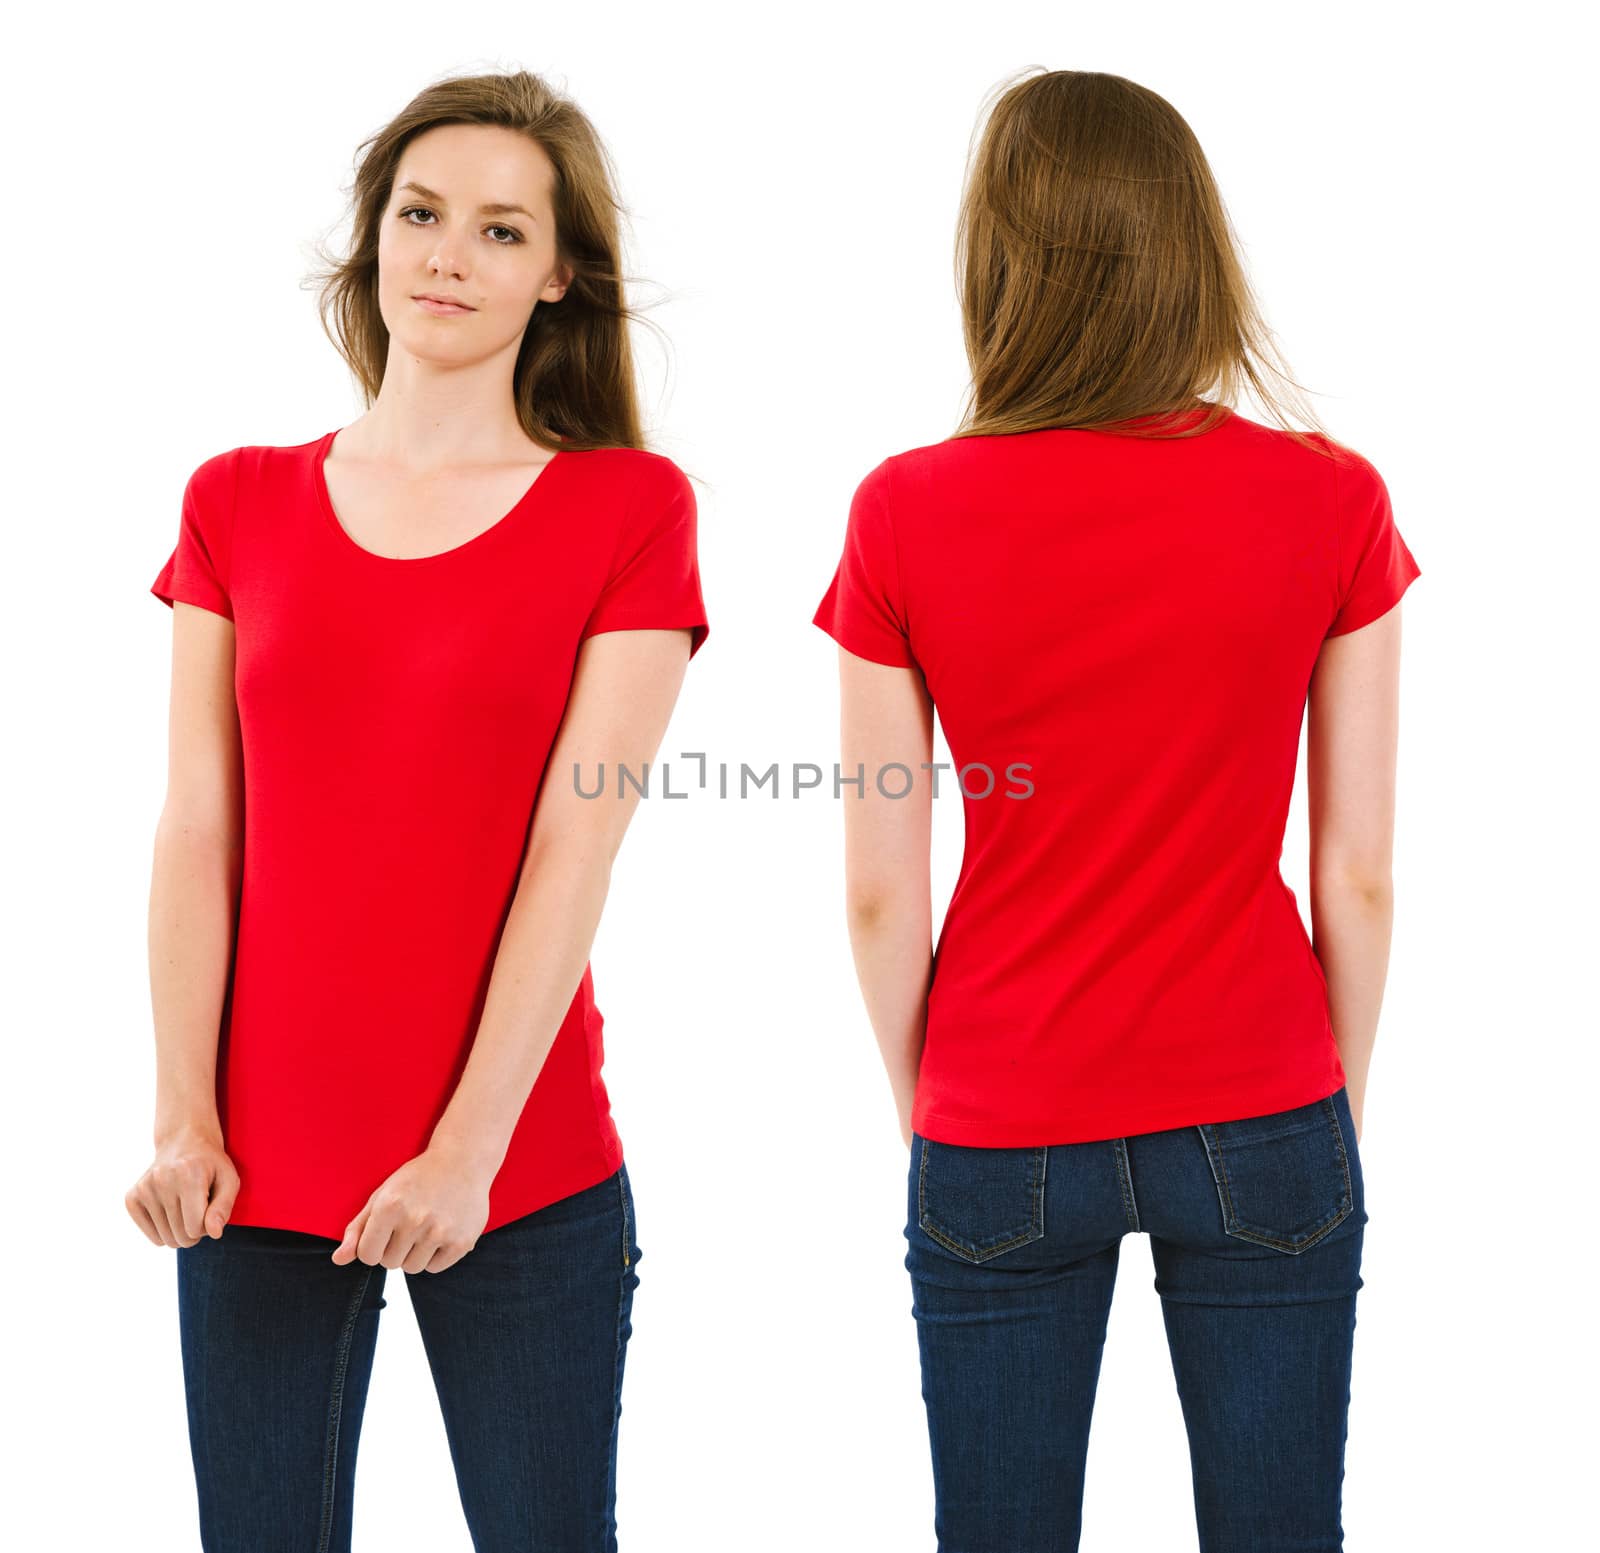 Photo of a young adult female posing with a blank red shirt.  Front and back views ready for your artwork or designs.
